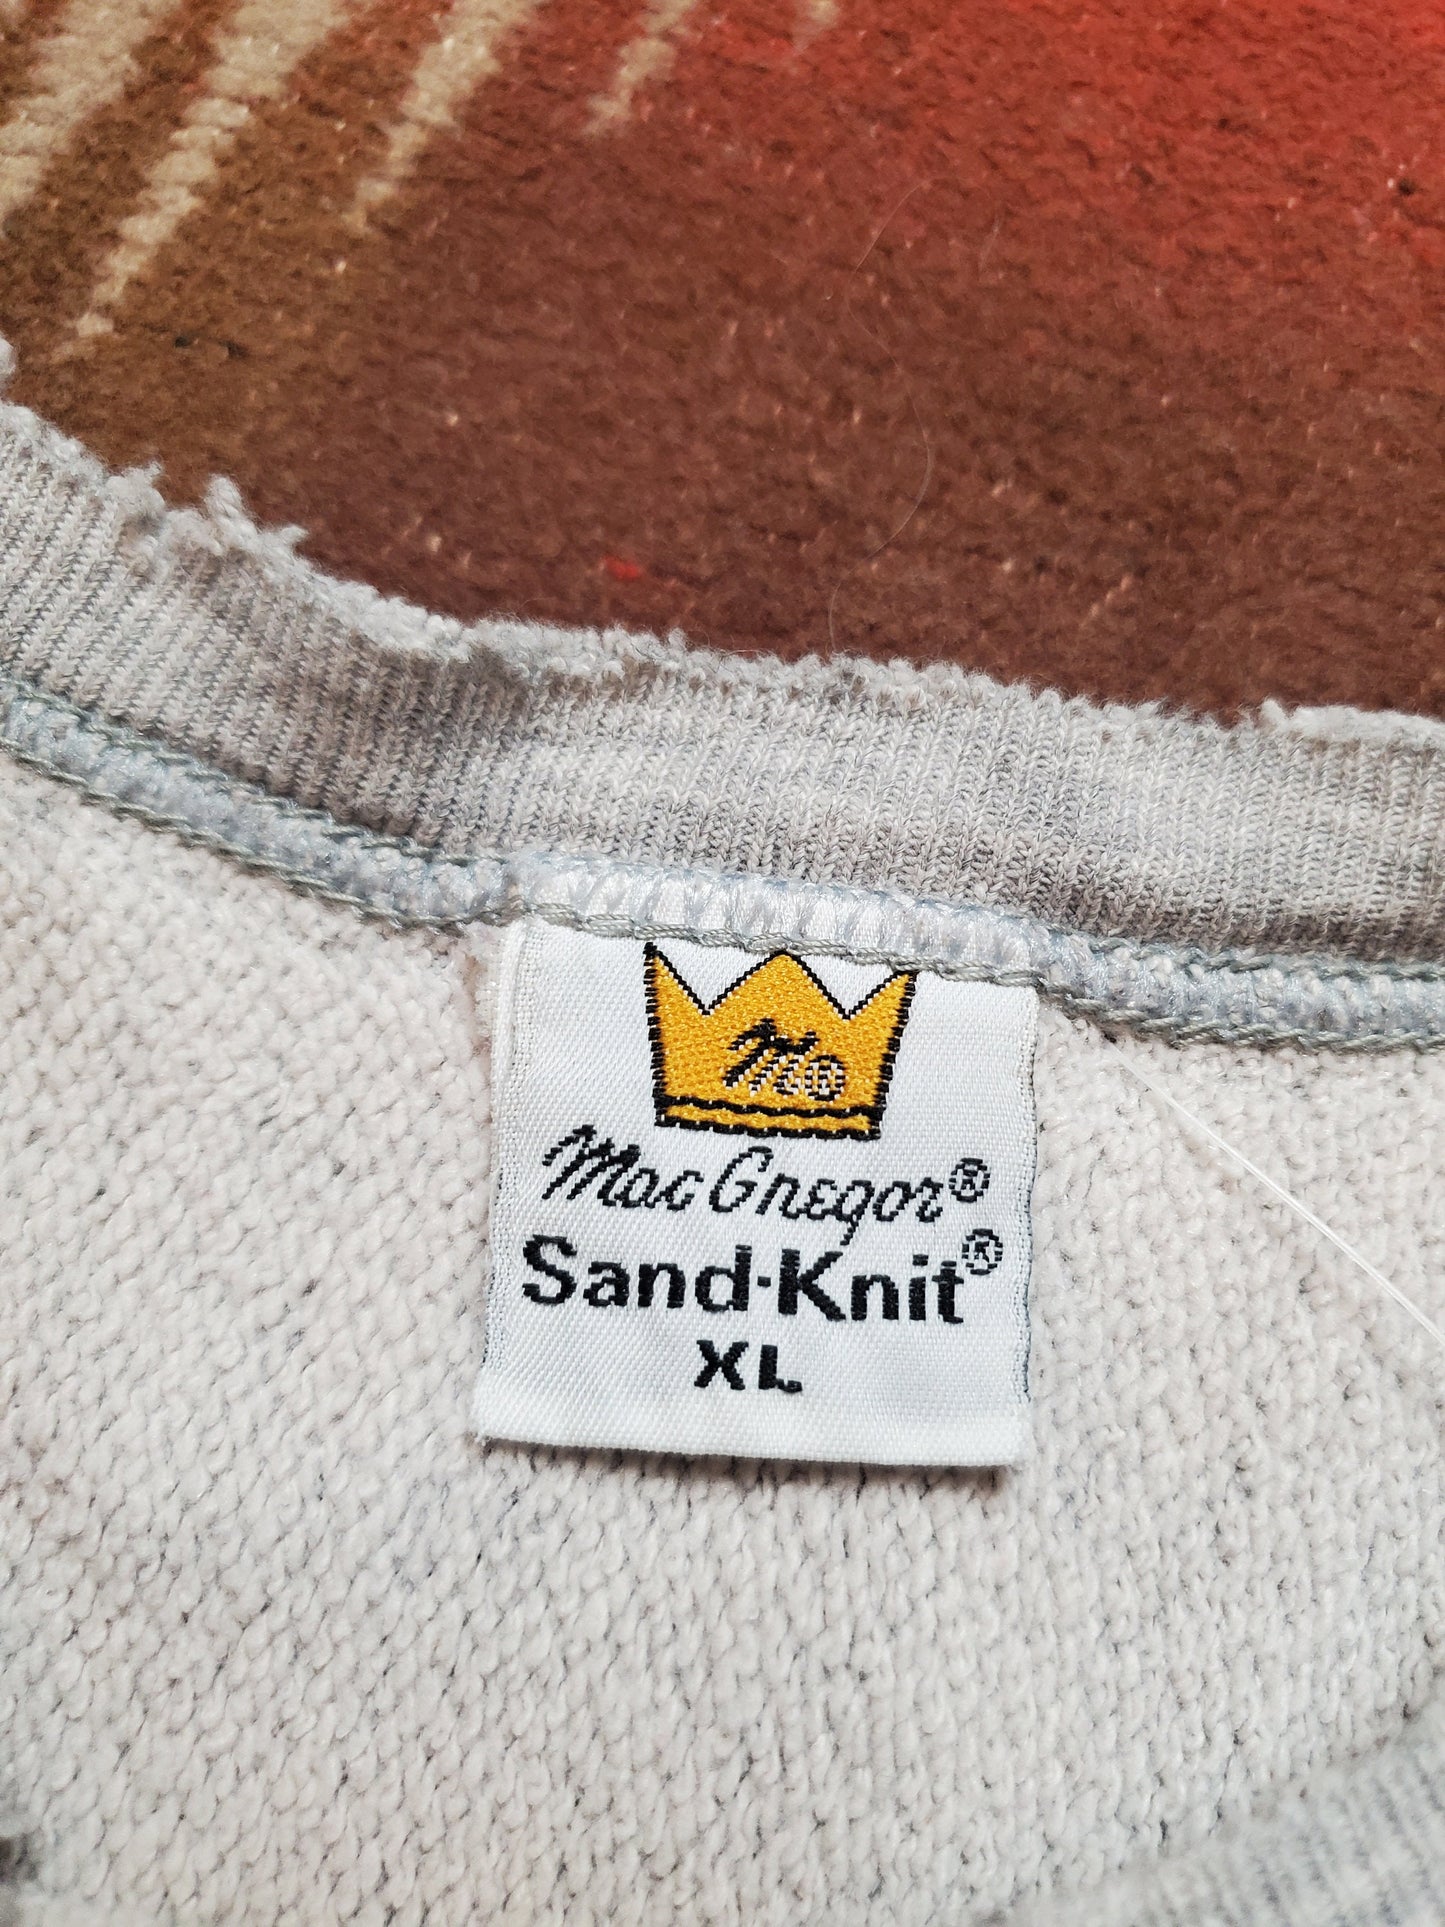 1980s Distressed Macgregor Sandknit Wisconsin Athletic Department Sweatshirt Made in USA Size XL